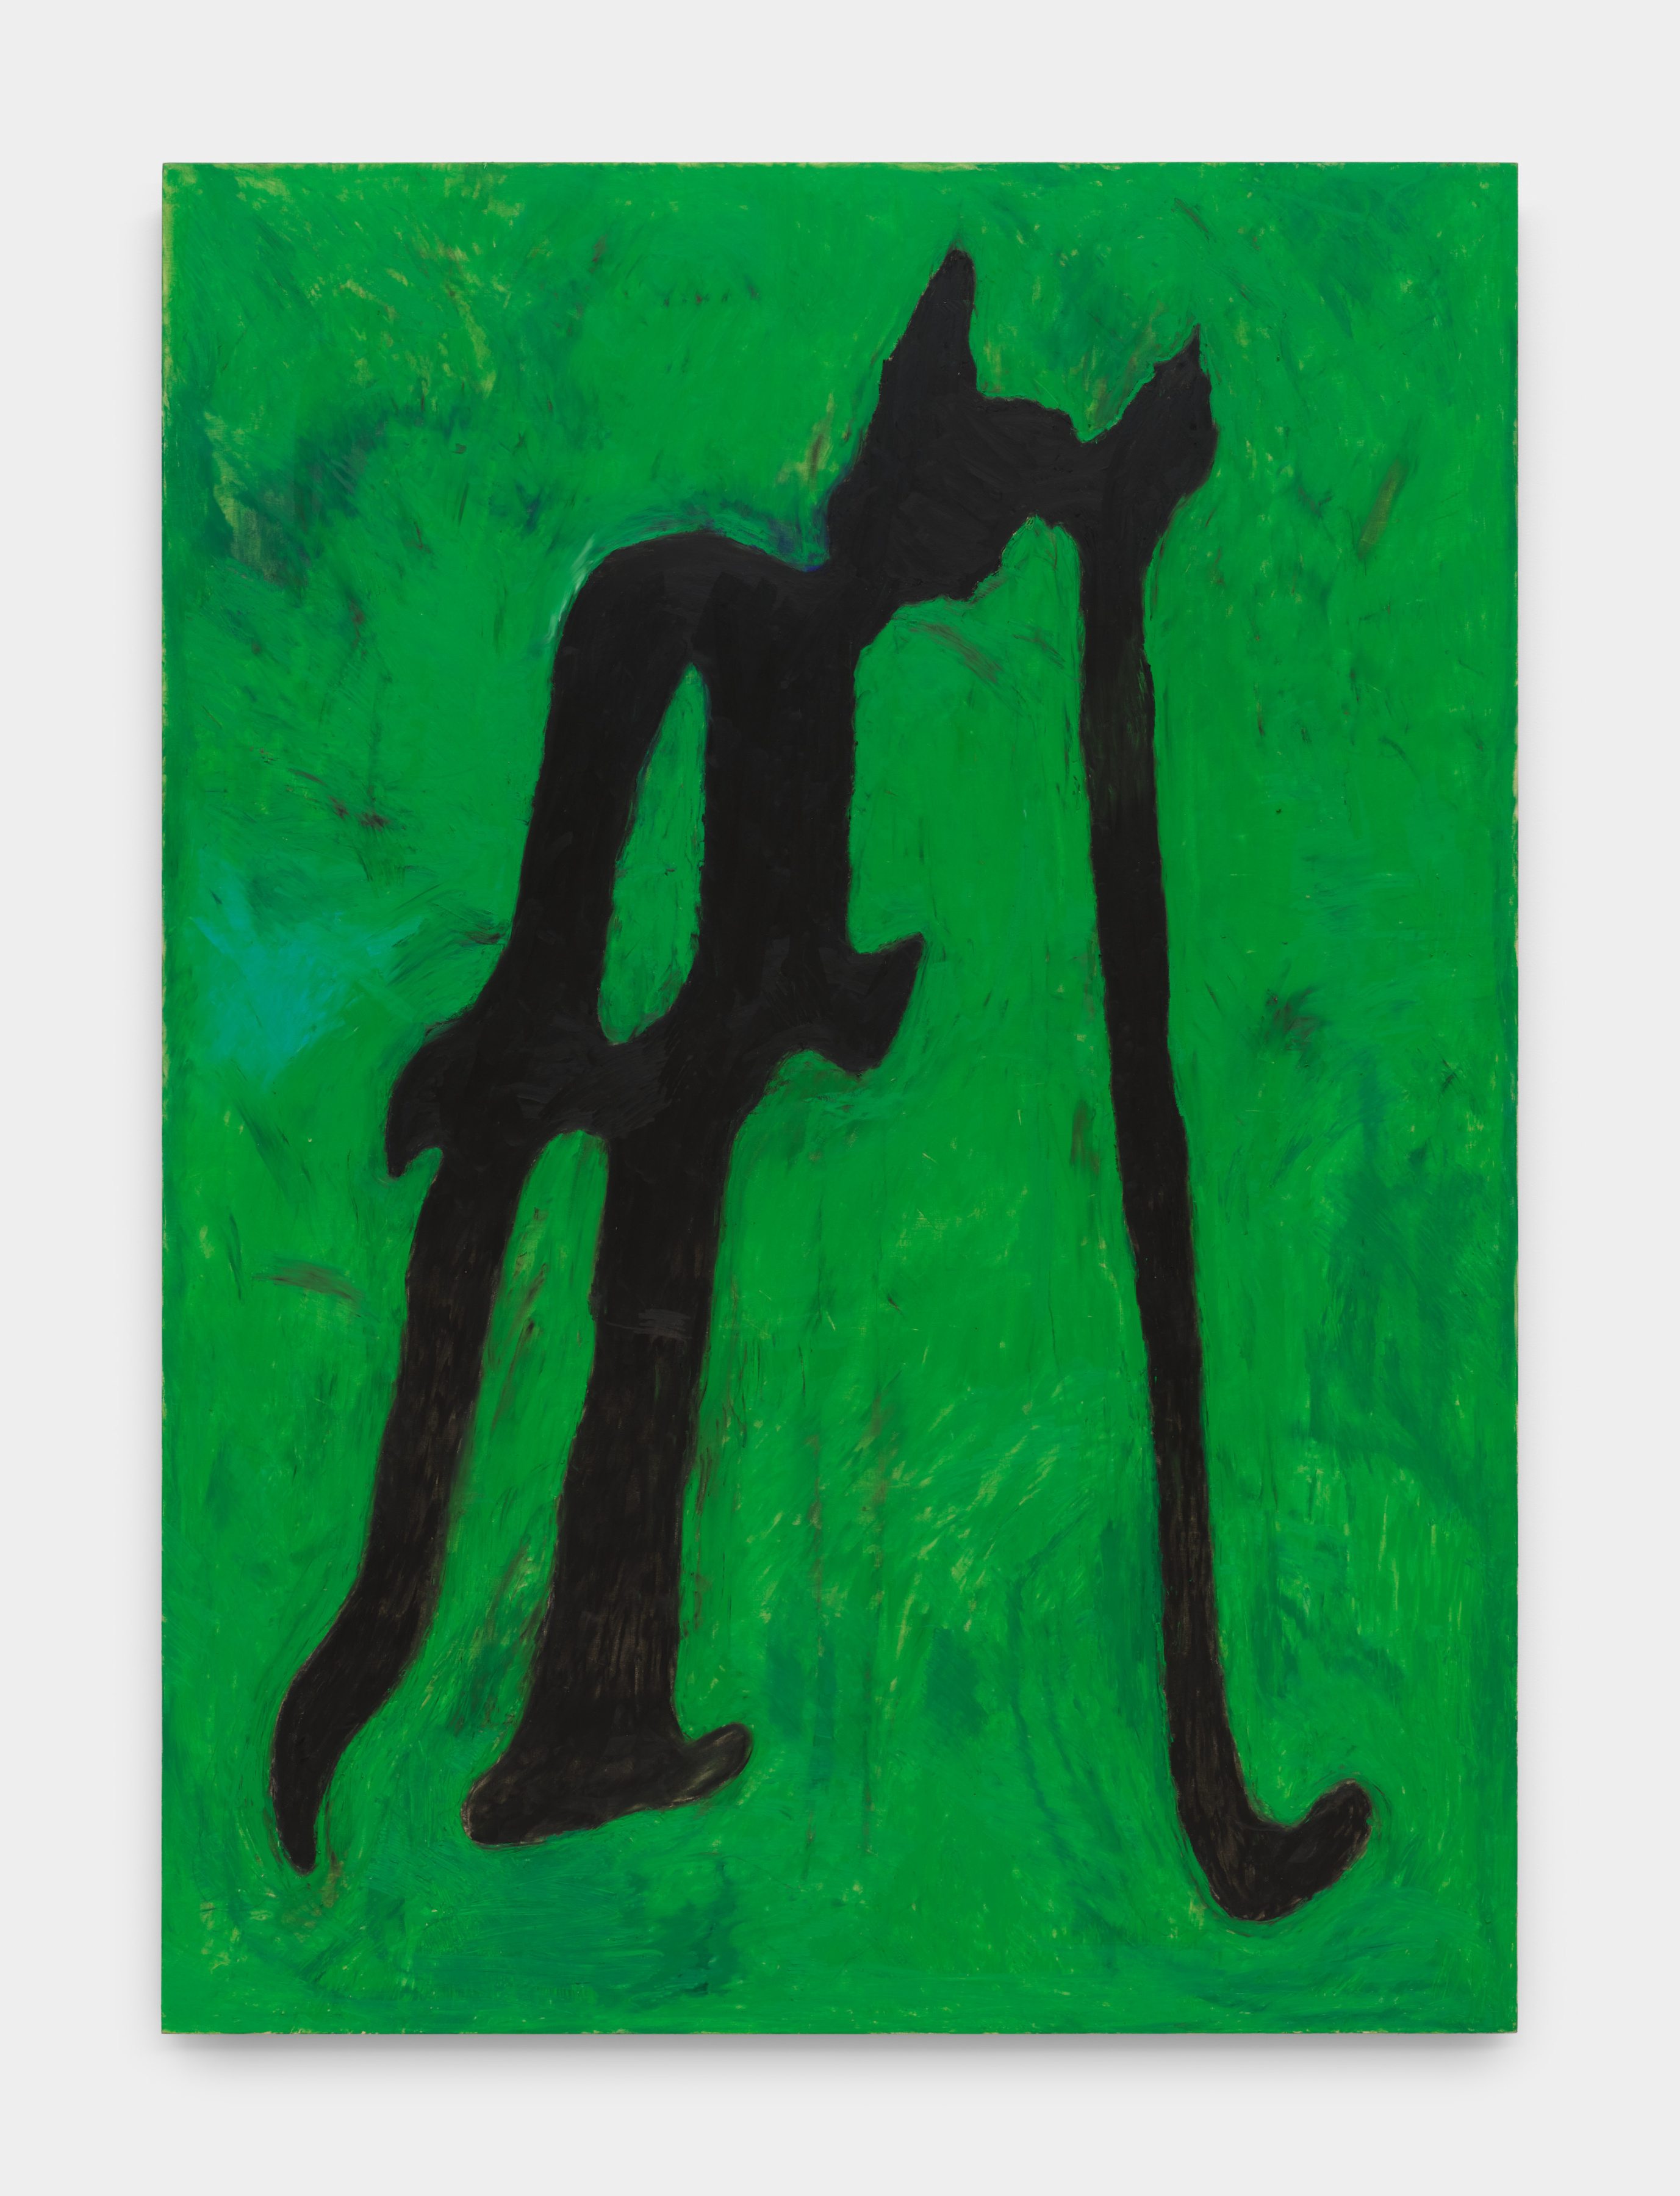 An oil stick on wood panel painting of an abstract anthropomorphic gothic font rendered in jet black against an emerald green background.